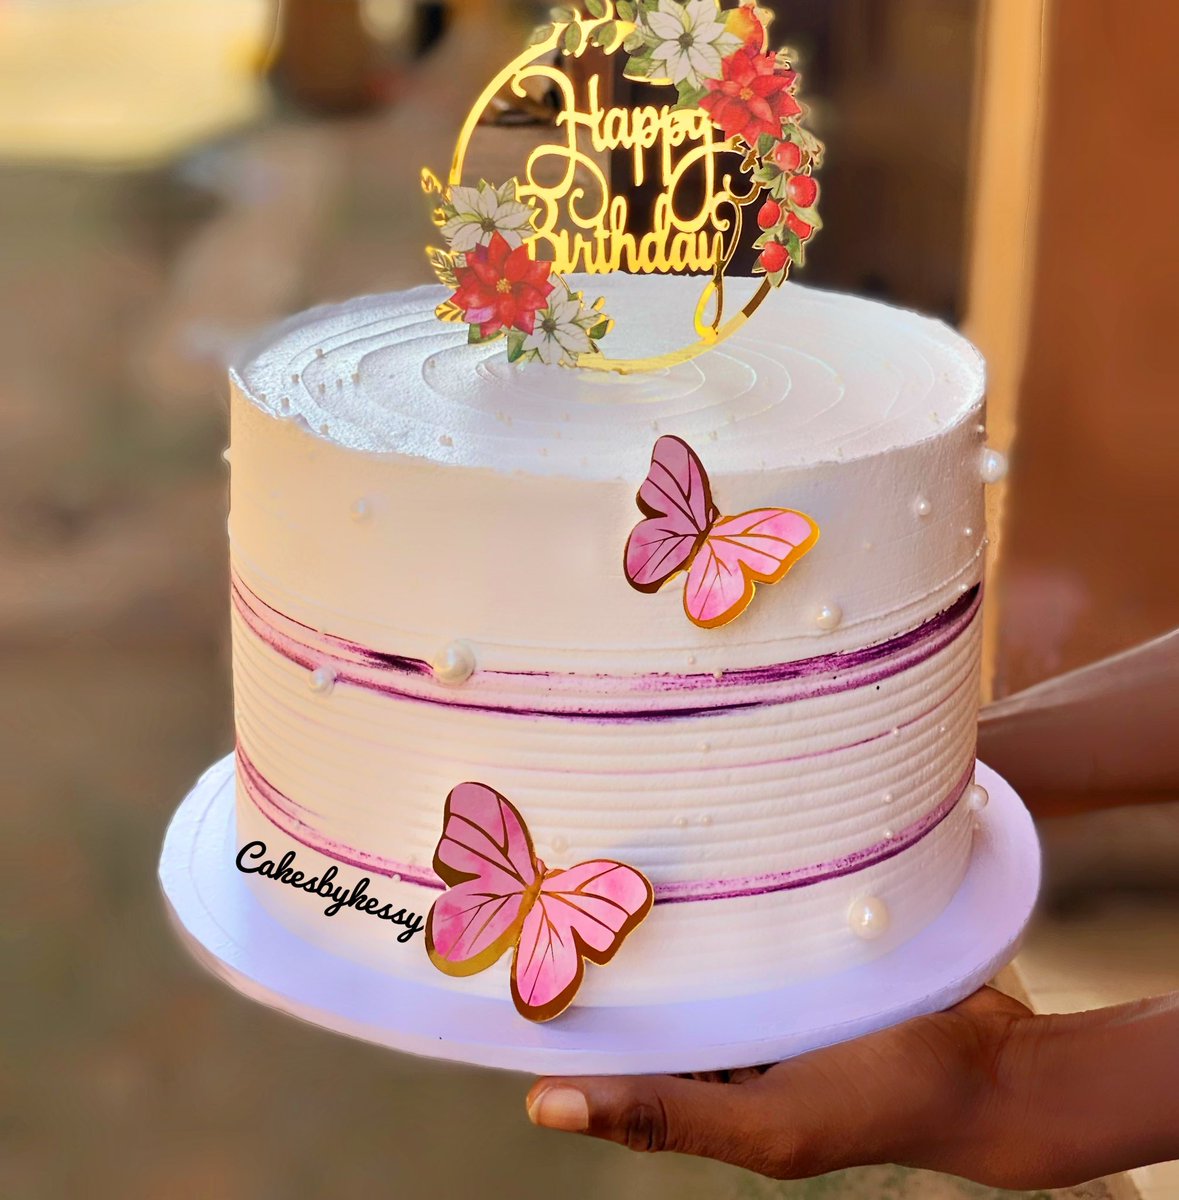 Good afternoon fam🤗
A beauty we sent out of the bakery 😍

We are available to take all your cake orders

Call or WhatsApp 08137774008
Location:Enugu 

#enugu #enugutwitter #baker